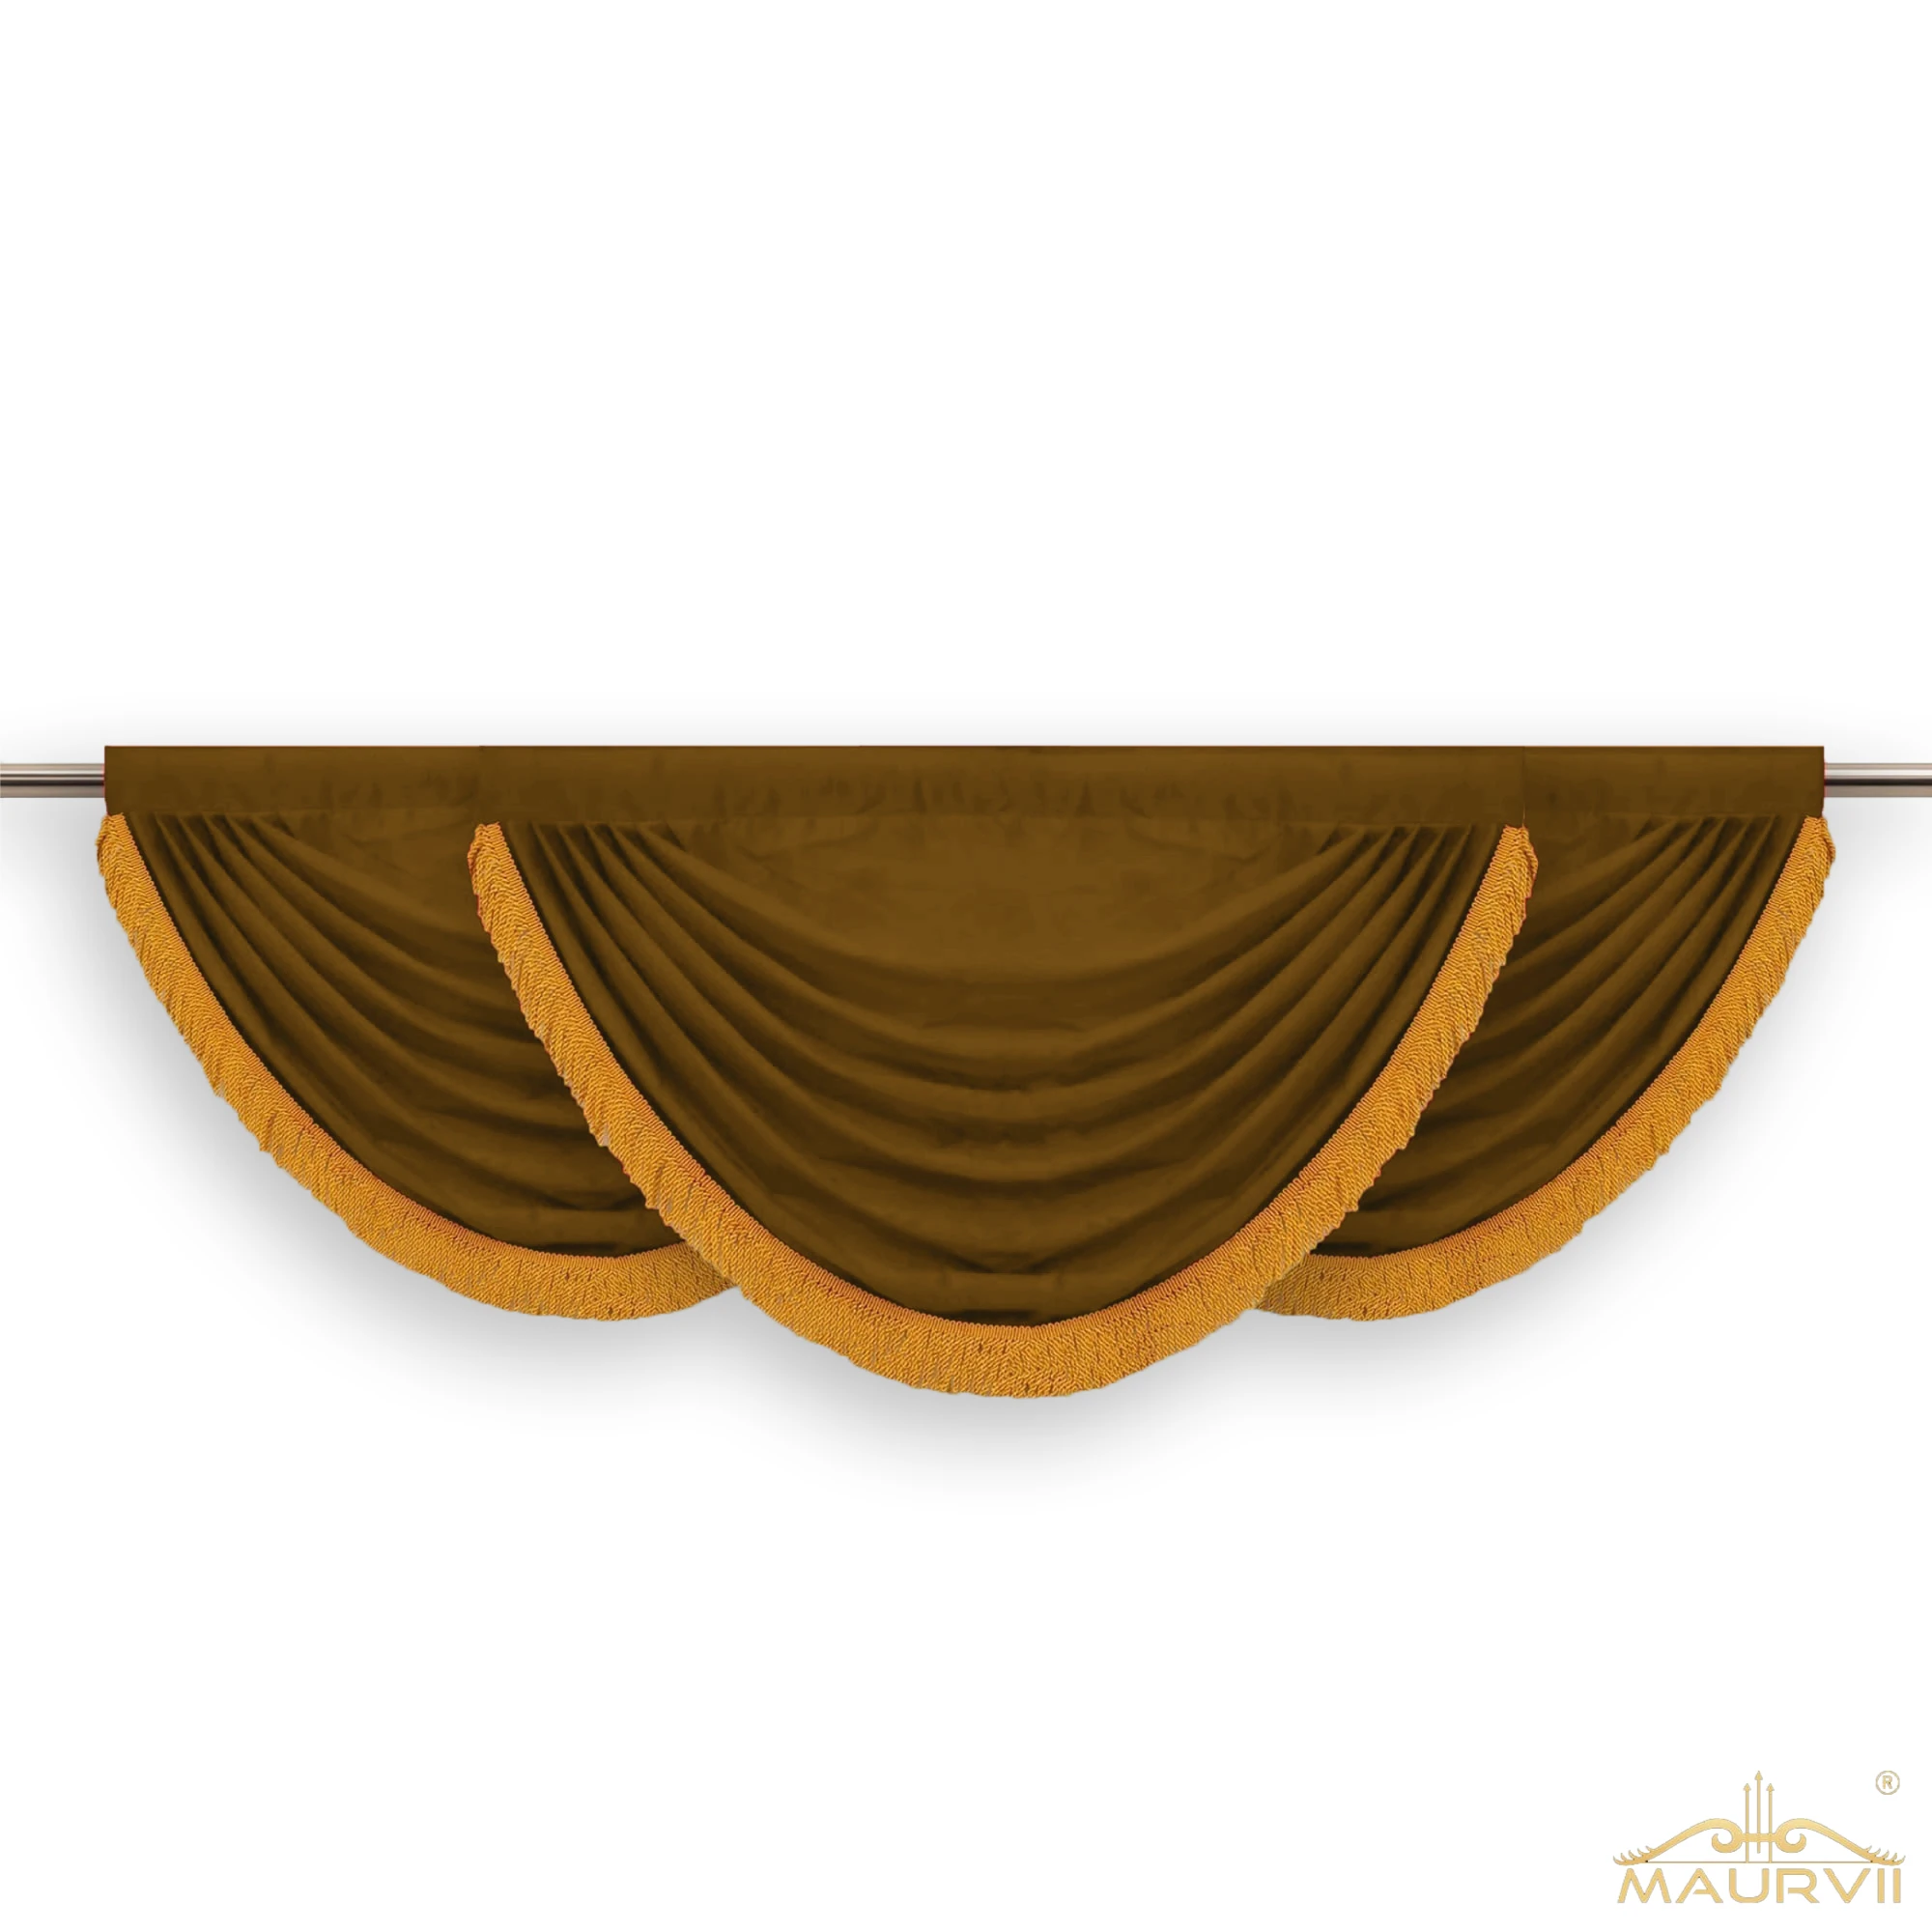 Chocolate brown valance curtains with fringe